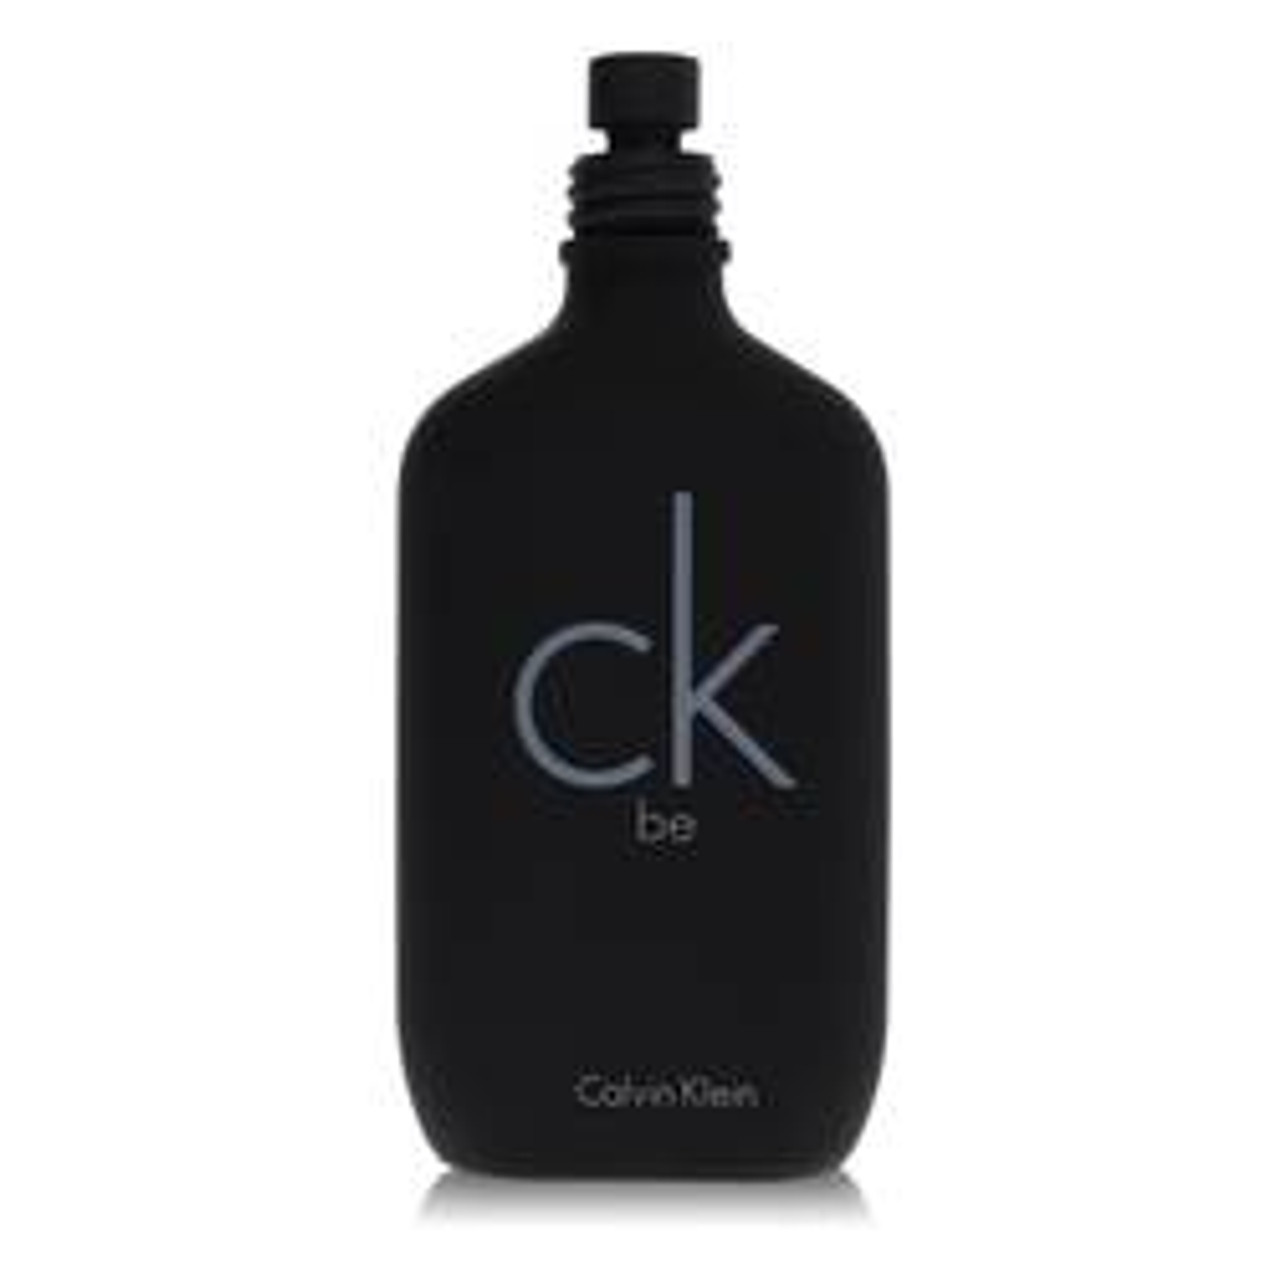 Ck Be Cologne By Calvin Klein Eau De Toilette Spray (Unisex Tester) 3.4 oz for Men - [From 50.33 - Choose pk Qty ] - *Ships from Miami